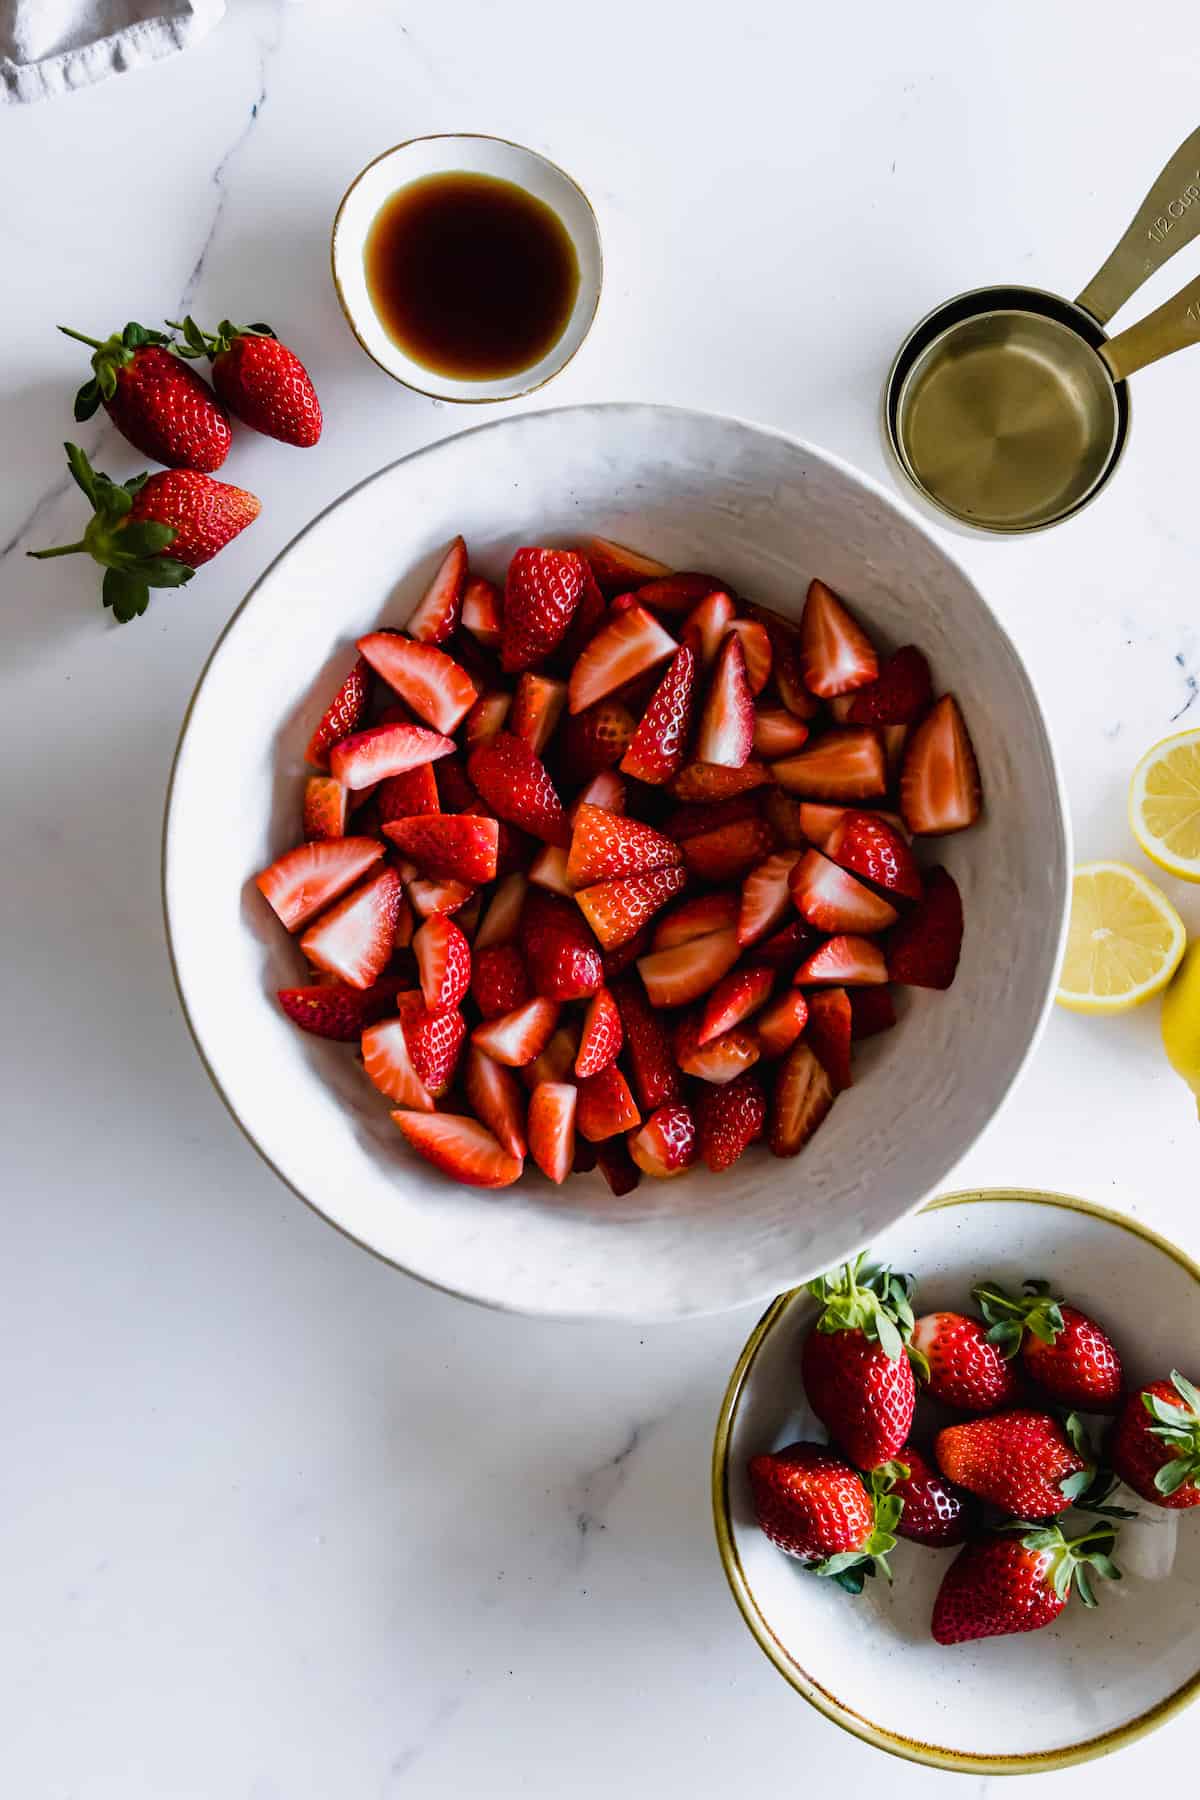 A bowl of fresh strawberries cut into quarters beside a dish of vanilla extract and two measuring cups.